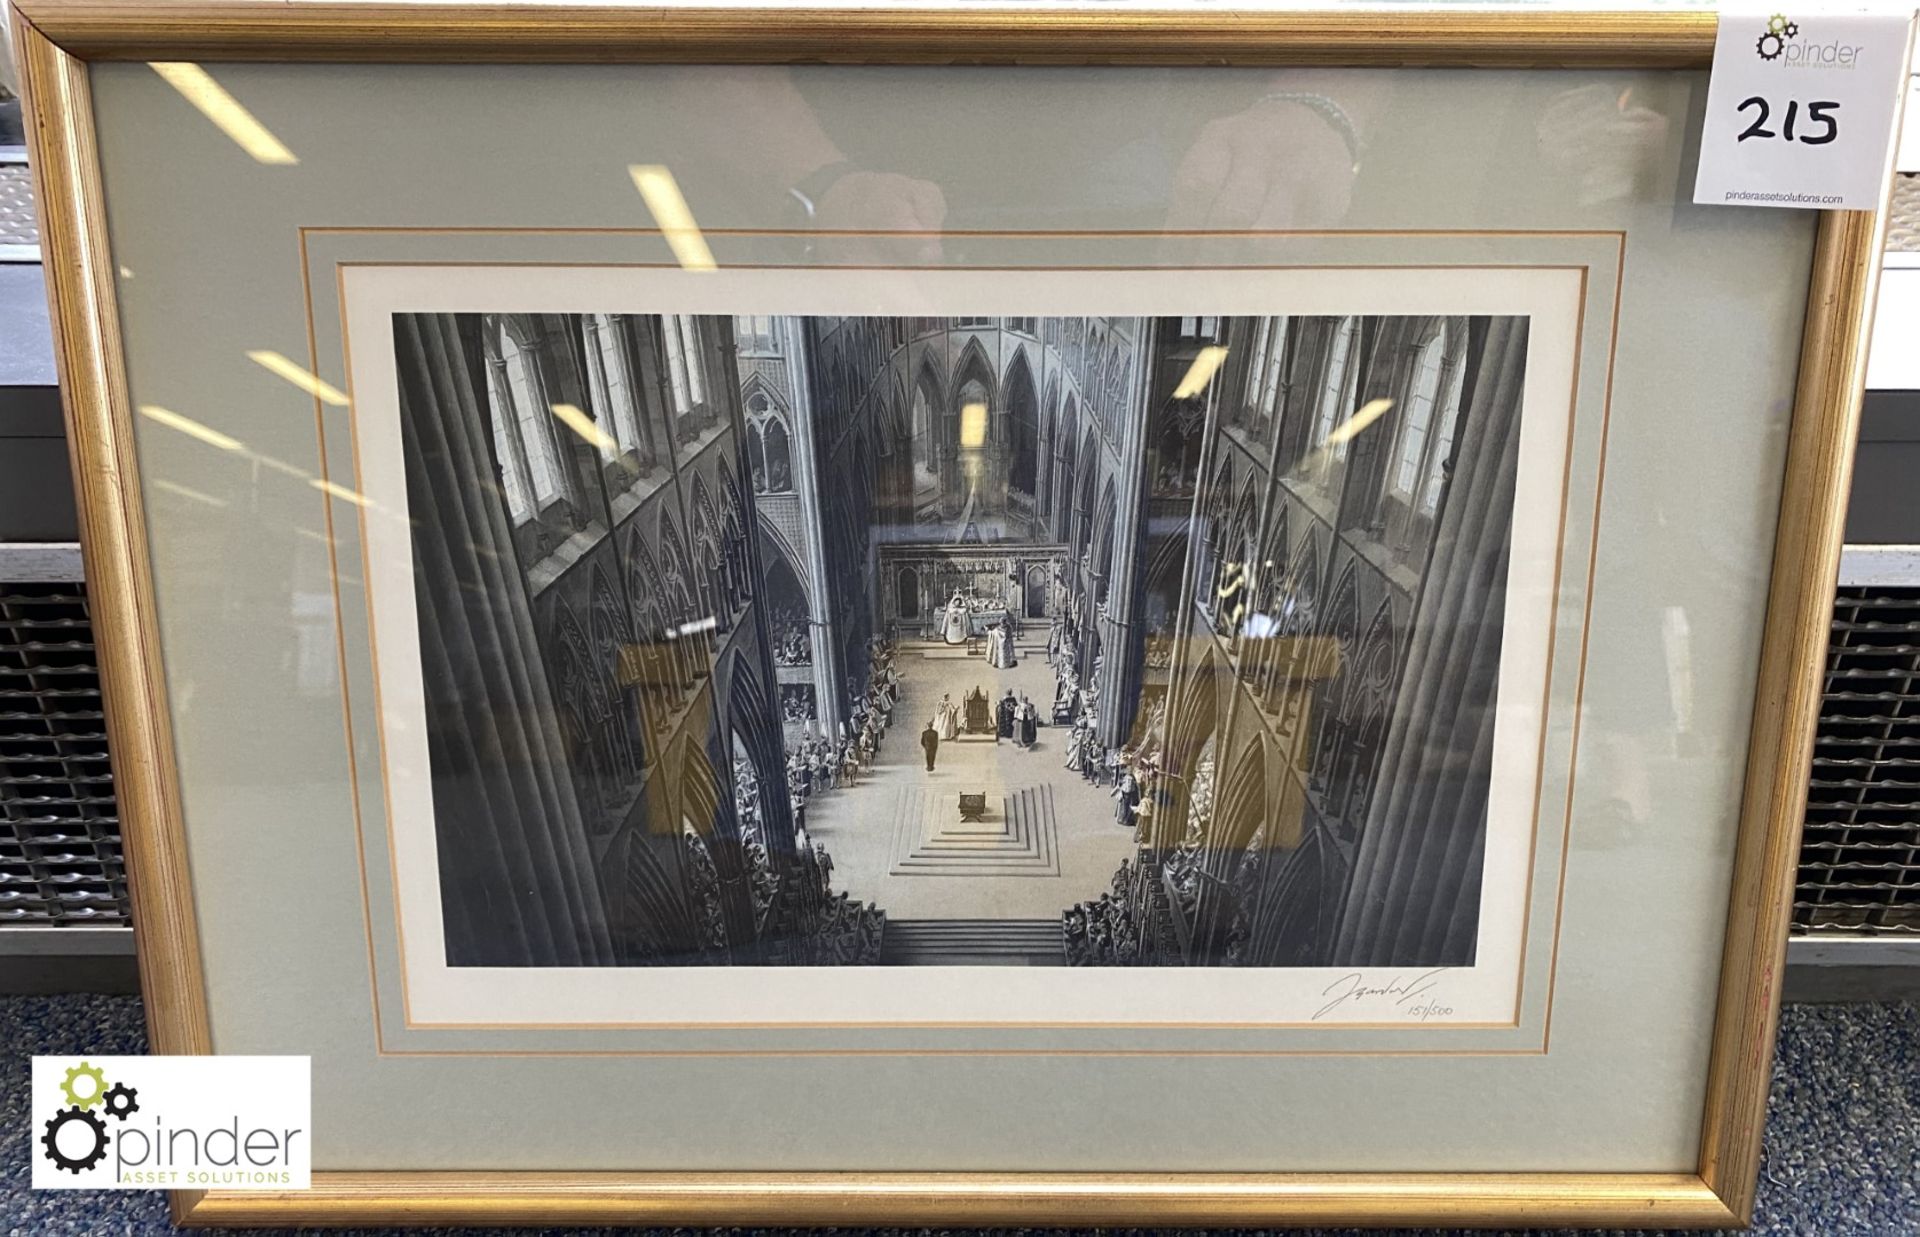 Framed and glazed signed limited edition Print of the Coronation of Elizabeth II, by James Gardener,